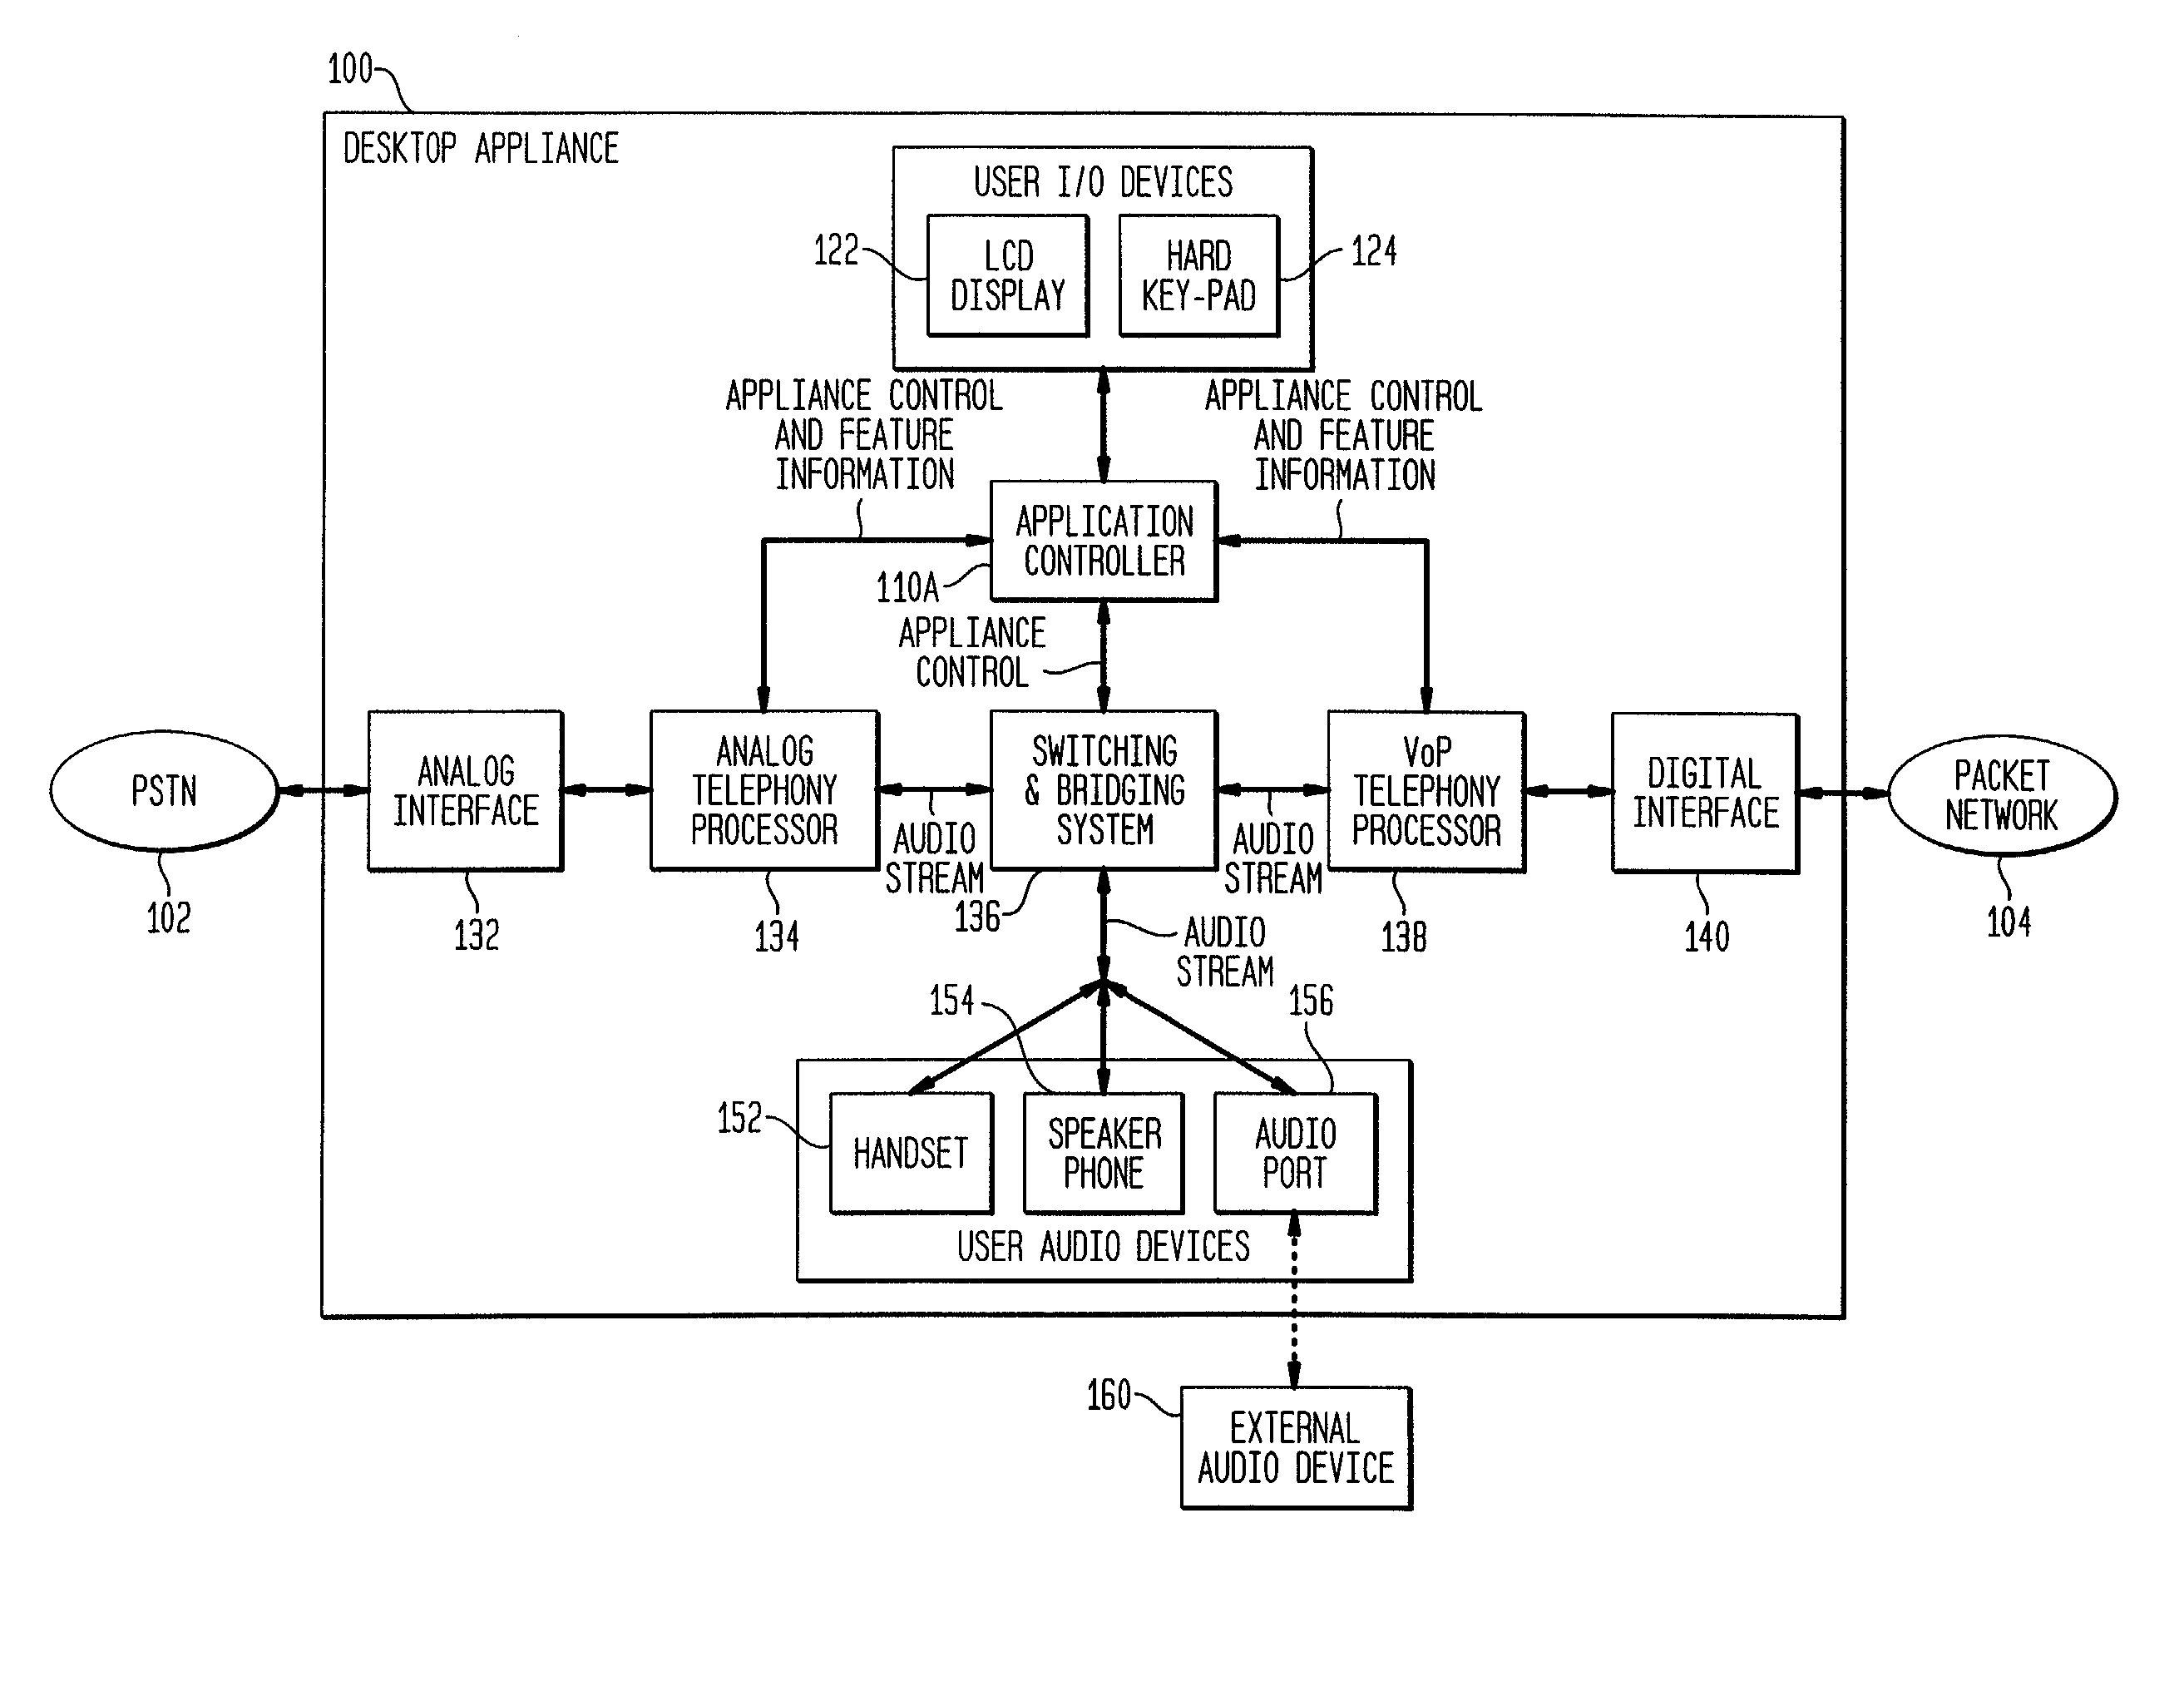 Interconnecting voice-over-packet and analog telephony at a desktop